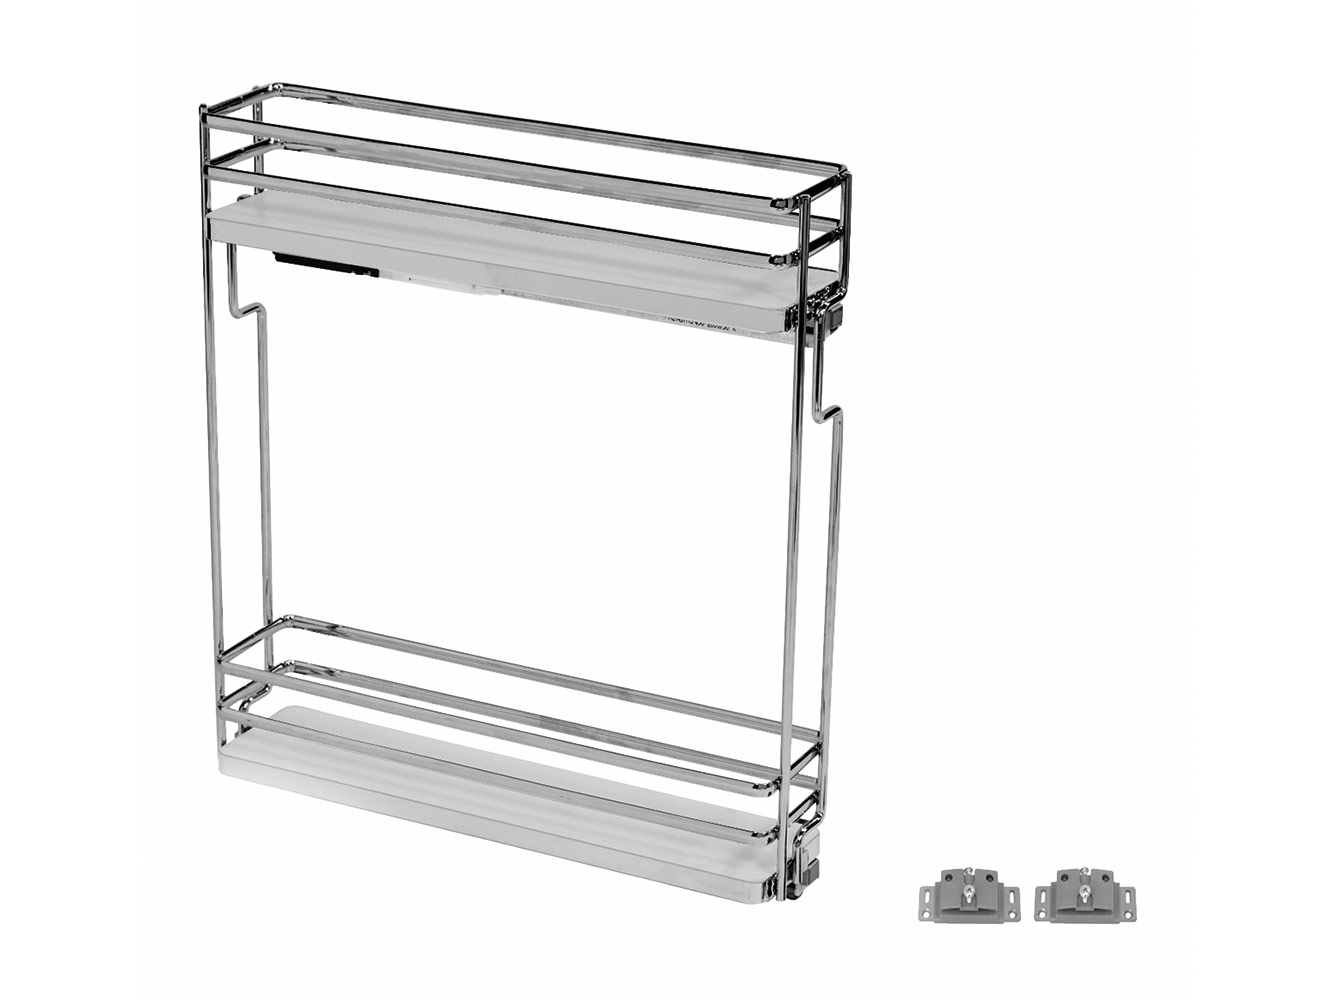 https://www.salice.com/media/immagini/4862_n_salice-kitchen-space-organizers-pull-out-base-filler-IMG-02.jpg